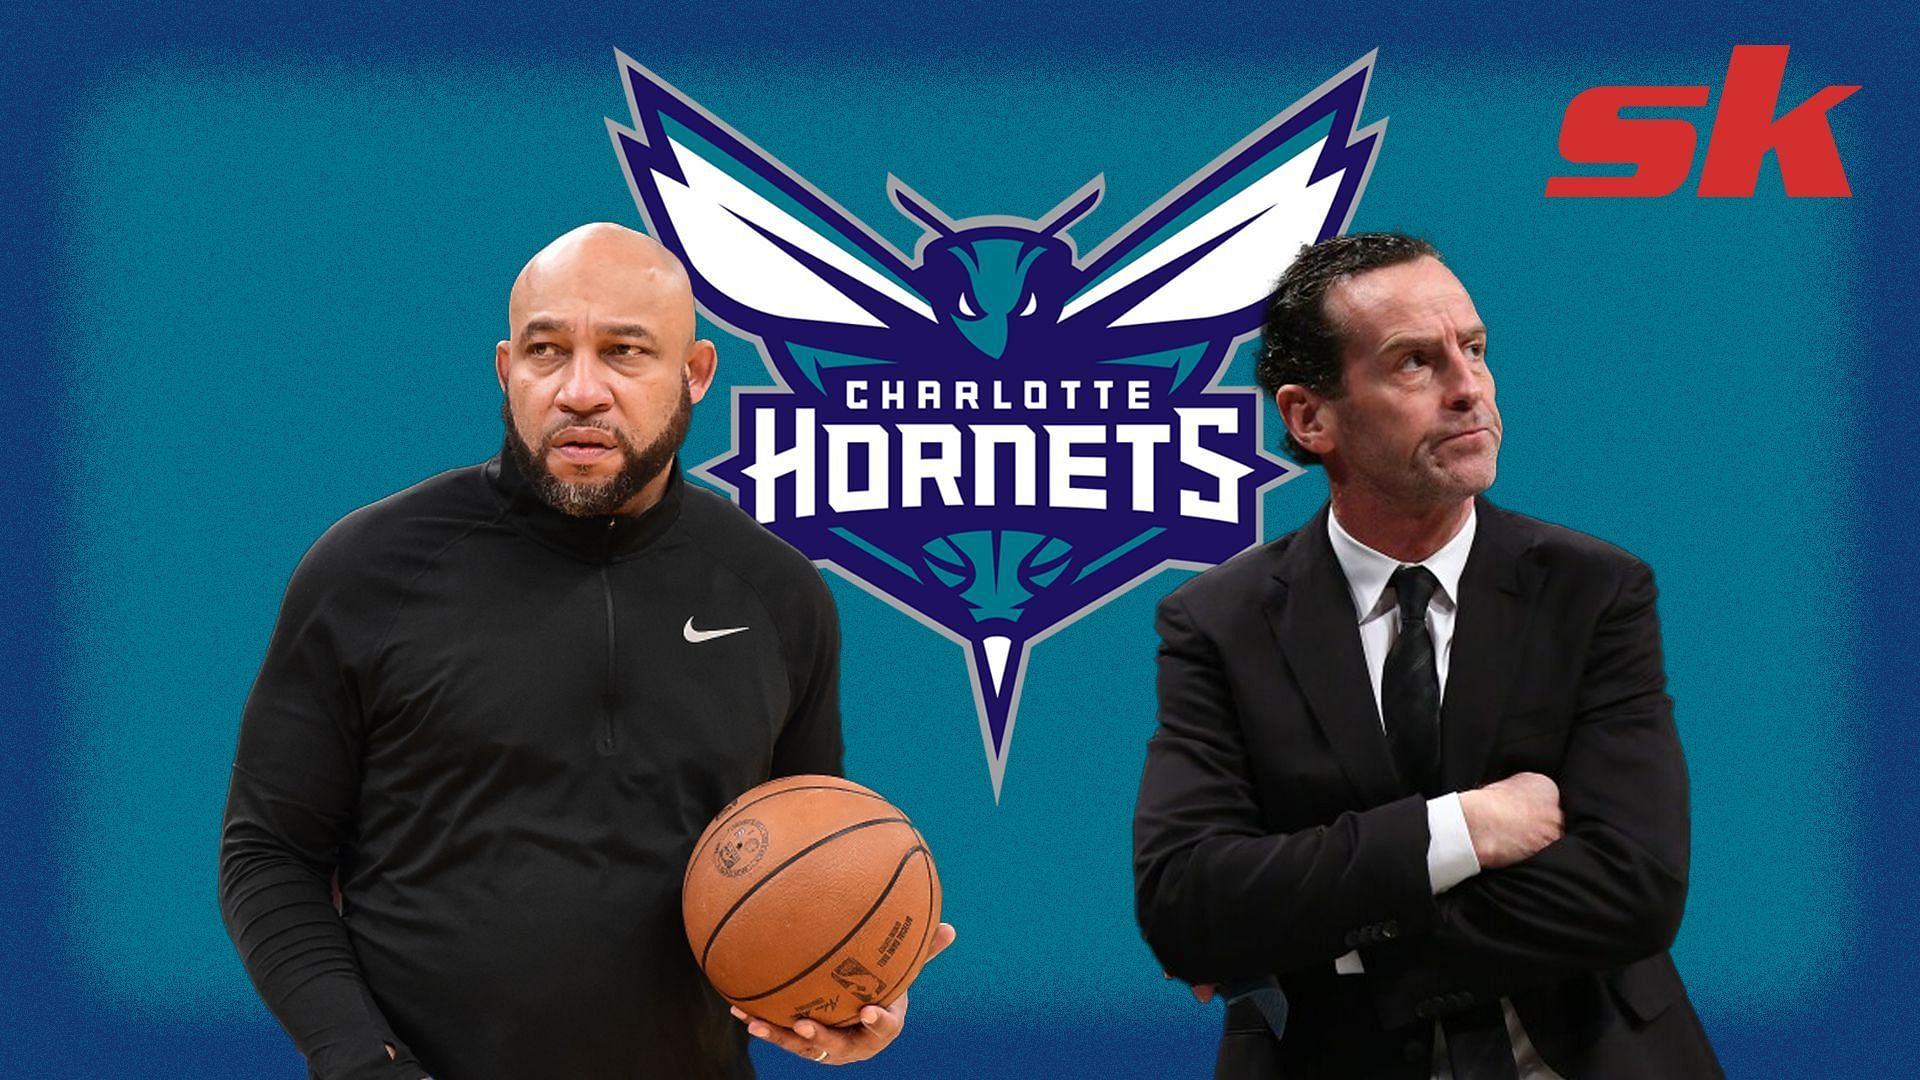 Darvin Ham and Kenny Atkinson were options for the Charlotte Hornets head coaching job